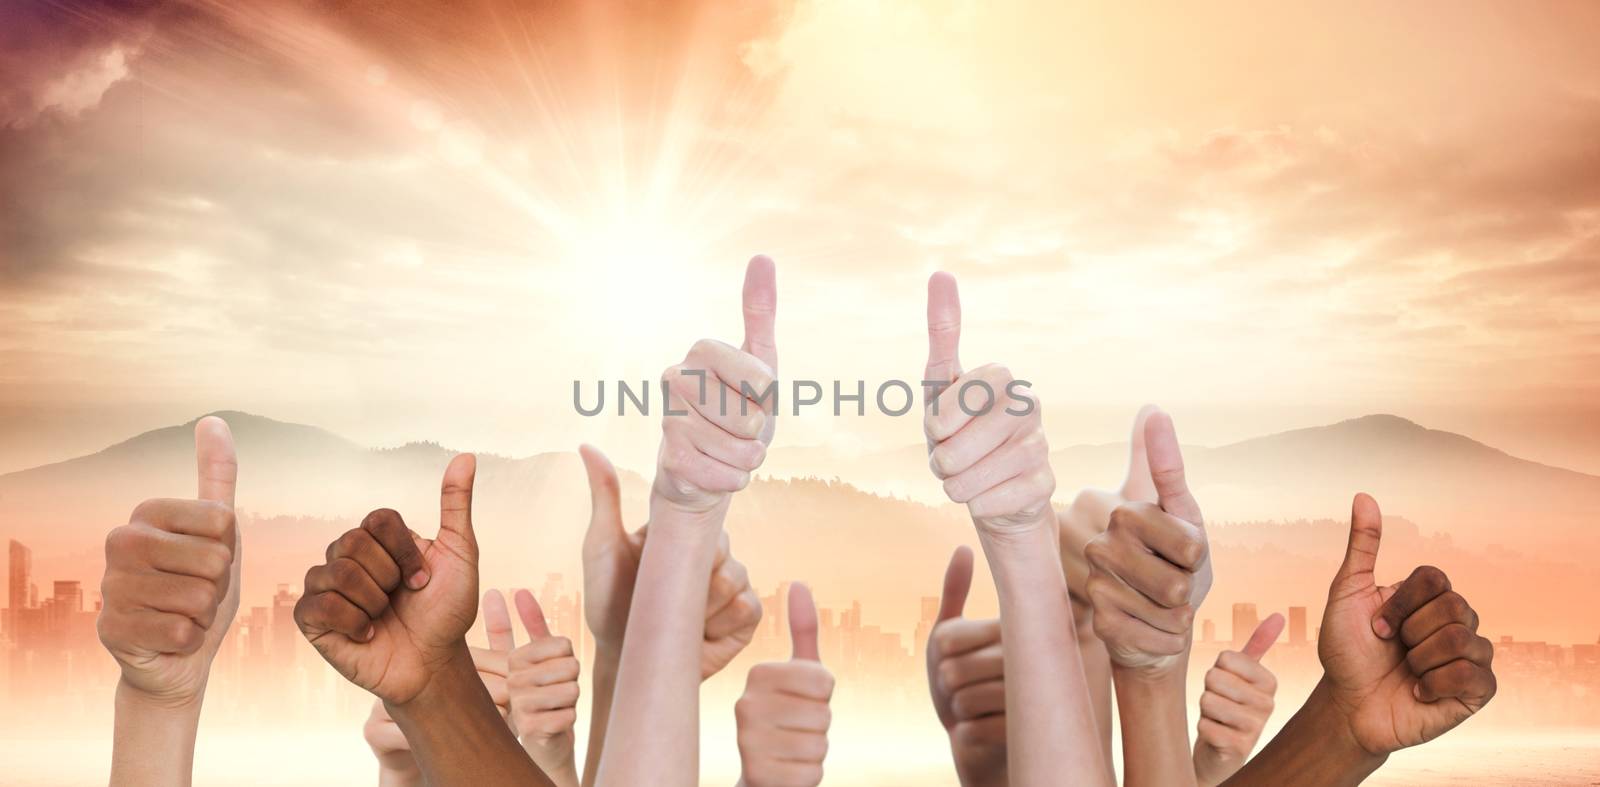 Hands showing thumbs up against sun shining over road and city